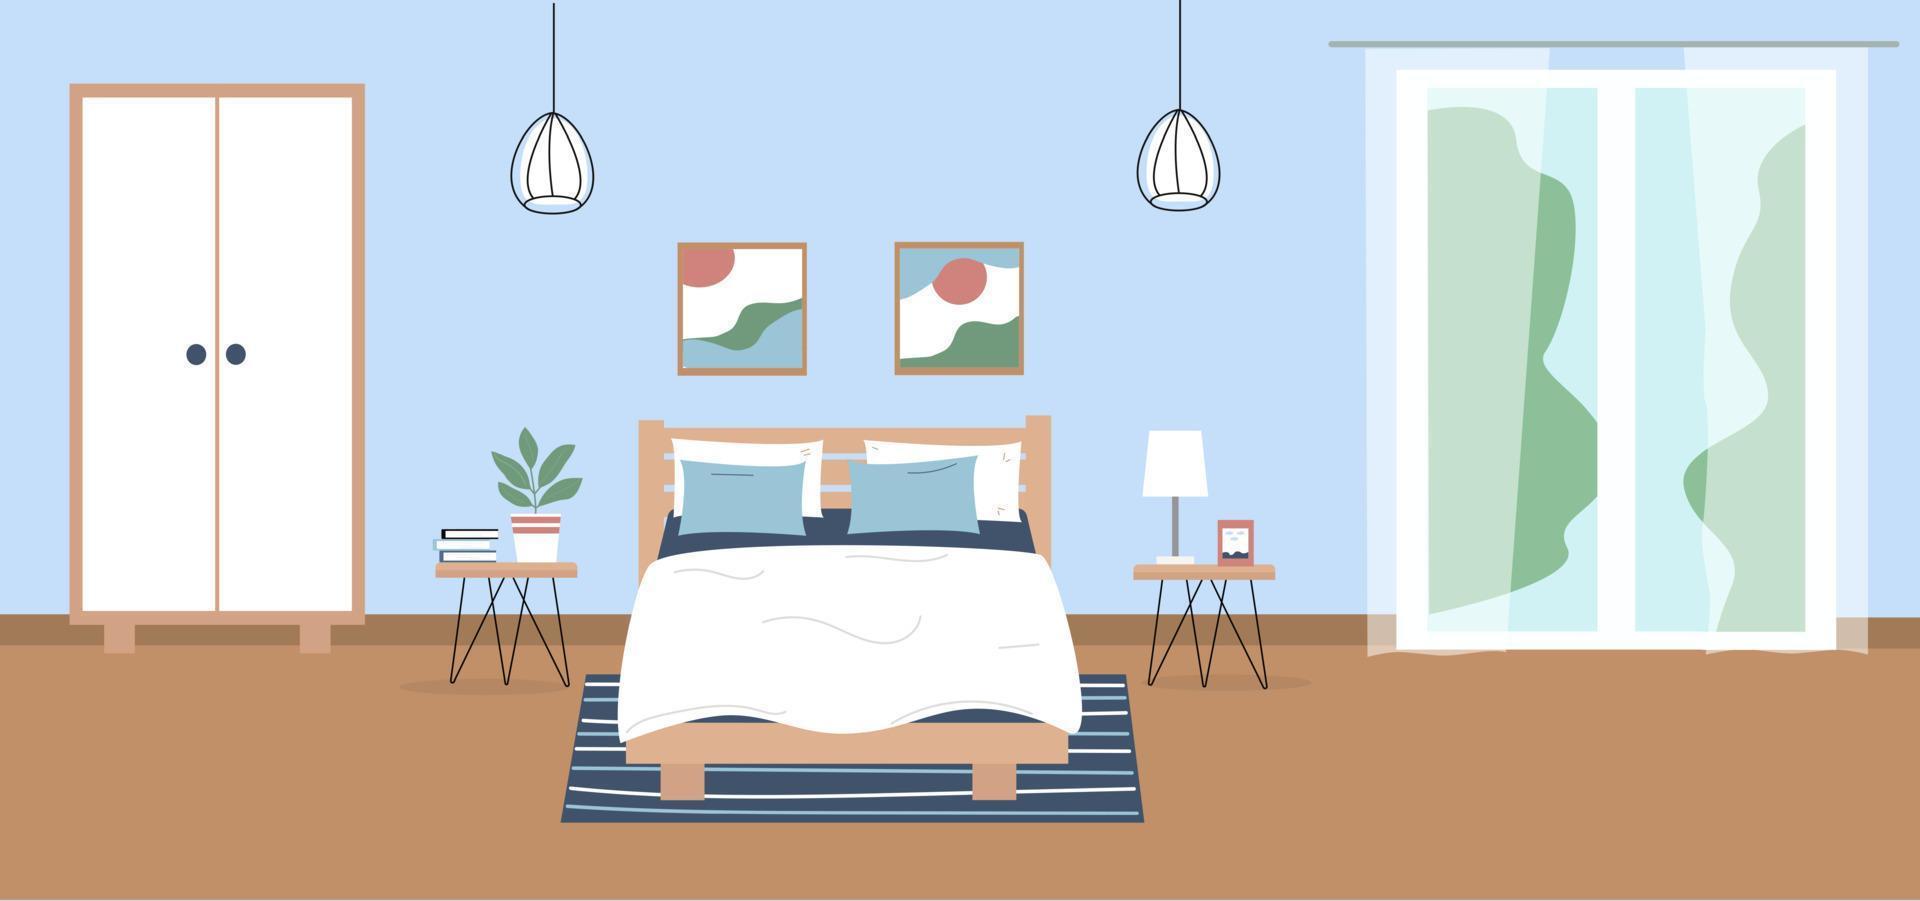 Modern bed room with furniture. Bed, wardrobe, table, balcony. Vector illustration in flat style.